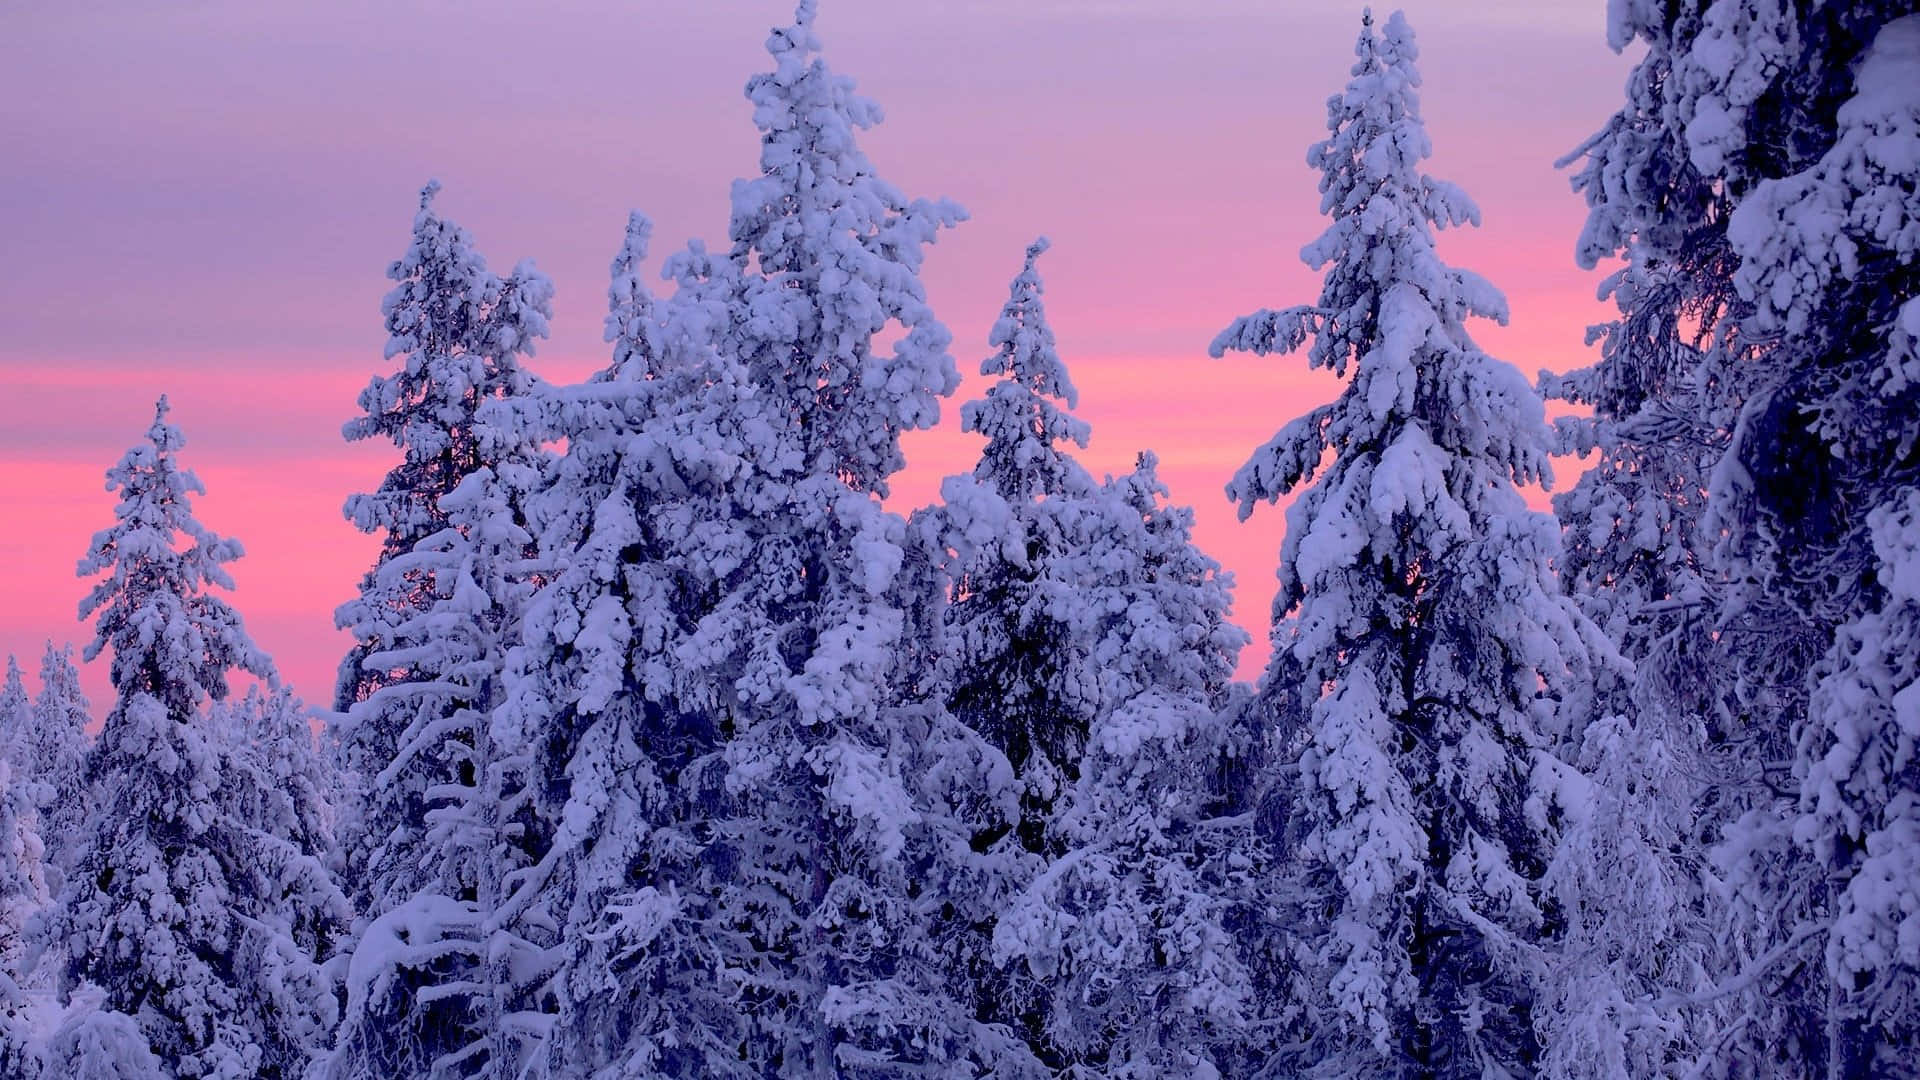 A Snow Covered Forest With A Pink Sunset